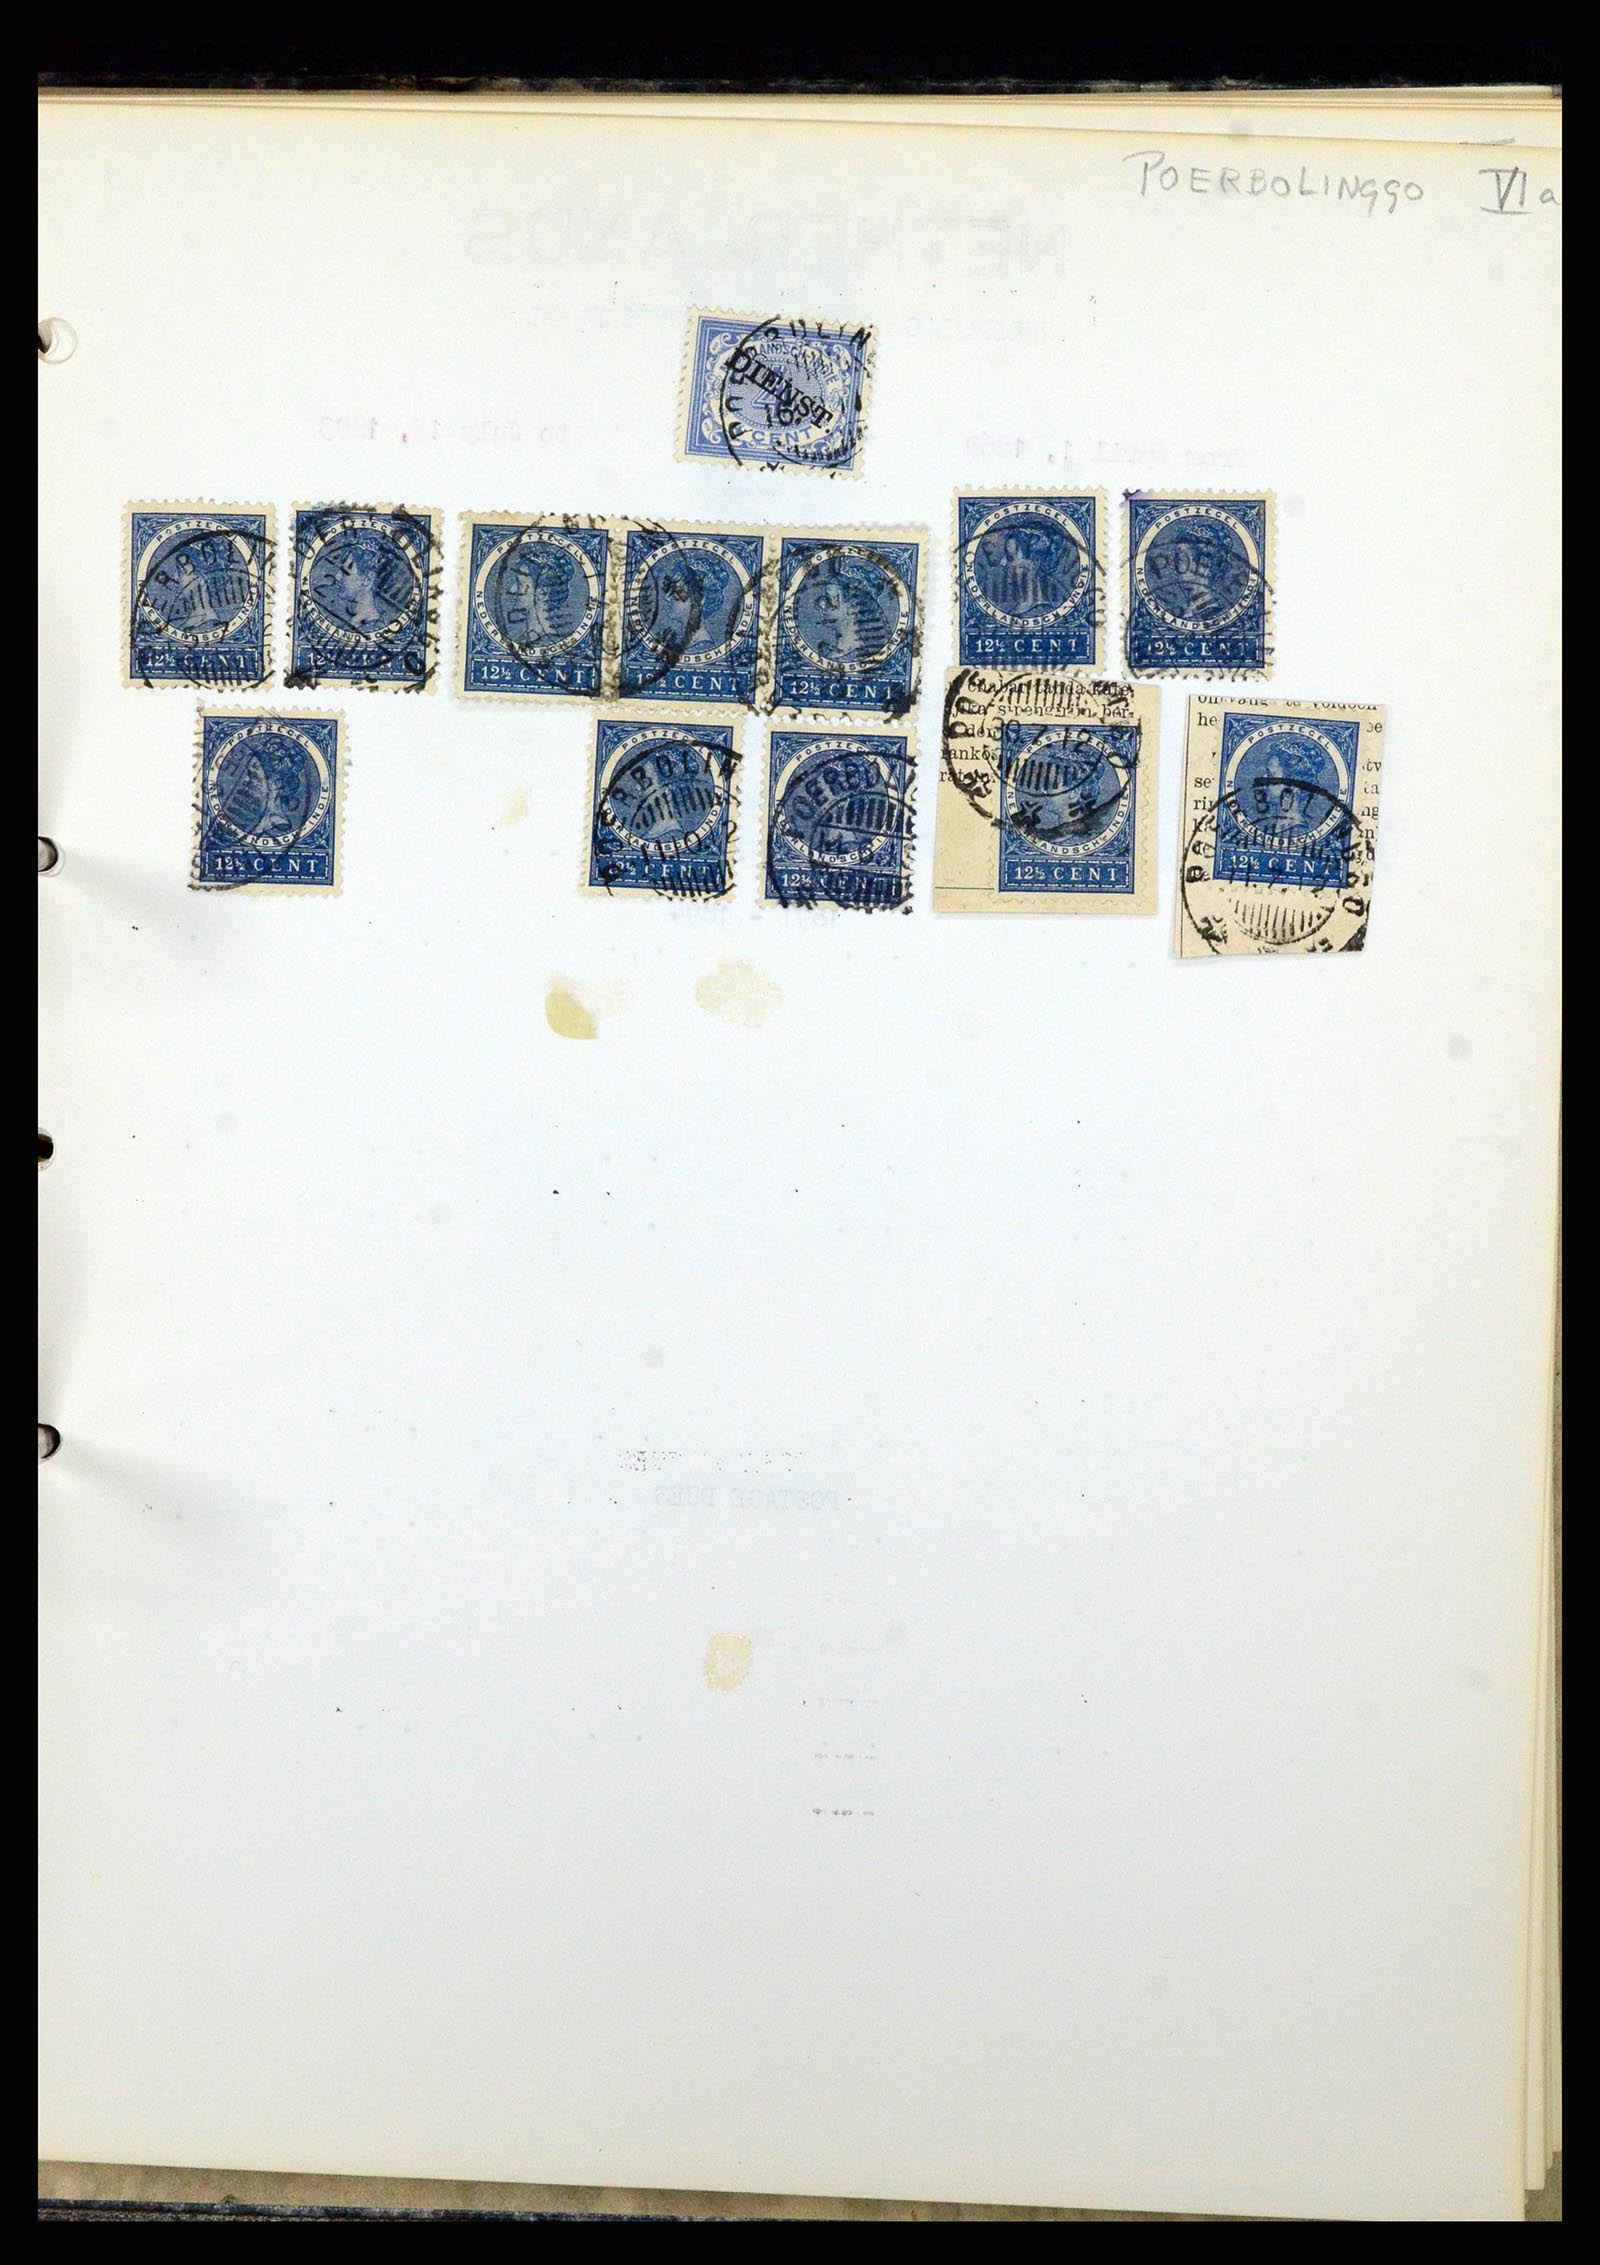 36841 093 - Stamp collection 36841 Dutch east Indies short bar cancels.